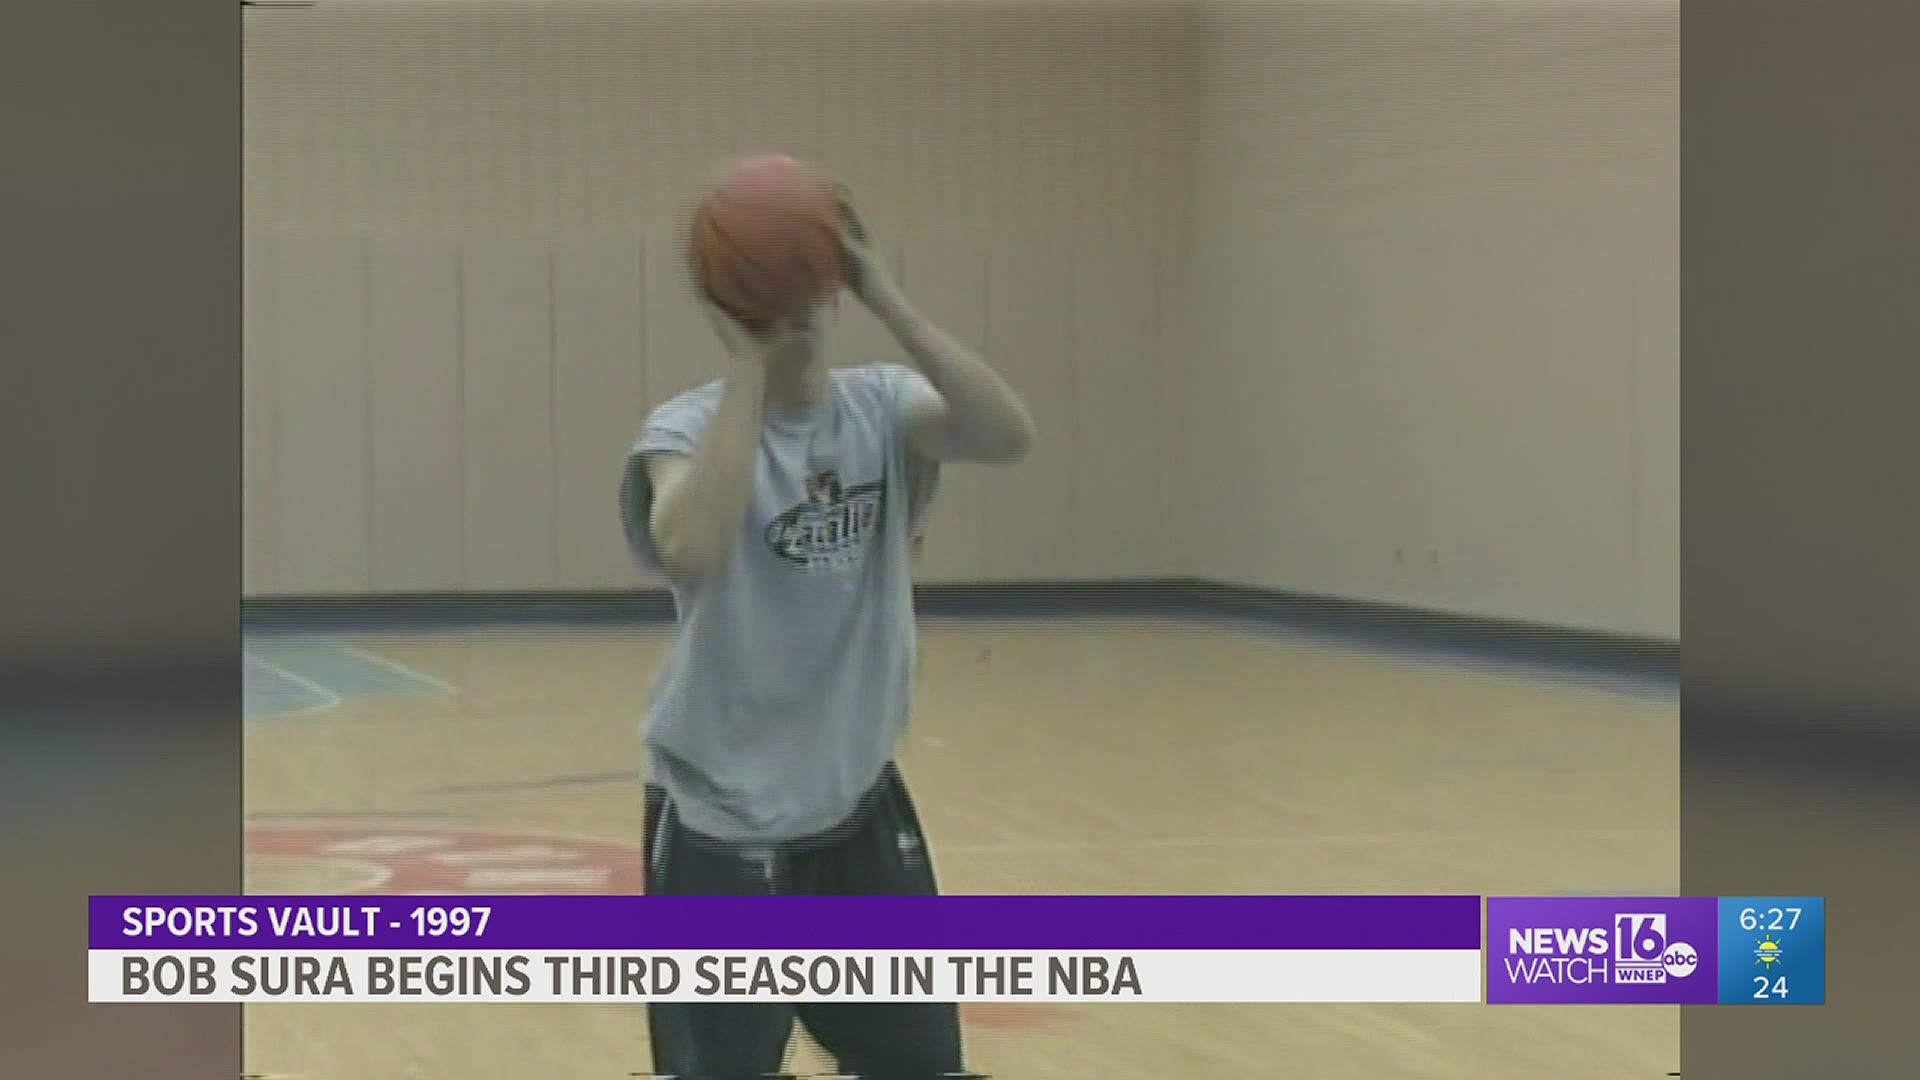 Sports Vault: 1997, Bob former GAR star, prepares for his 3rd season in the NBA with the Cleveland Cavaliers